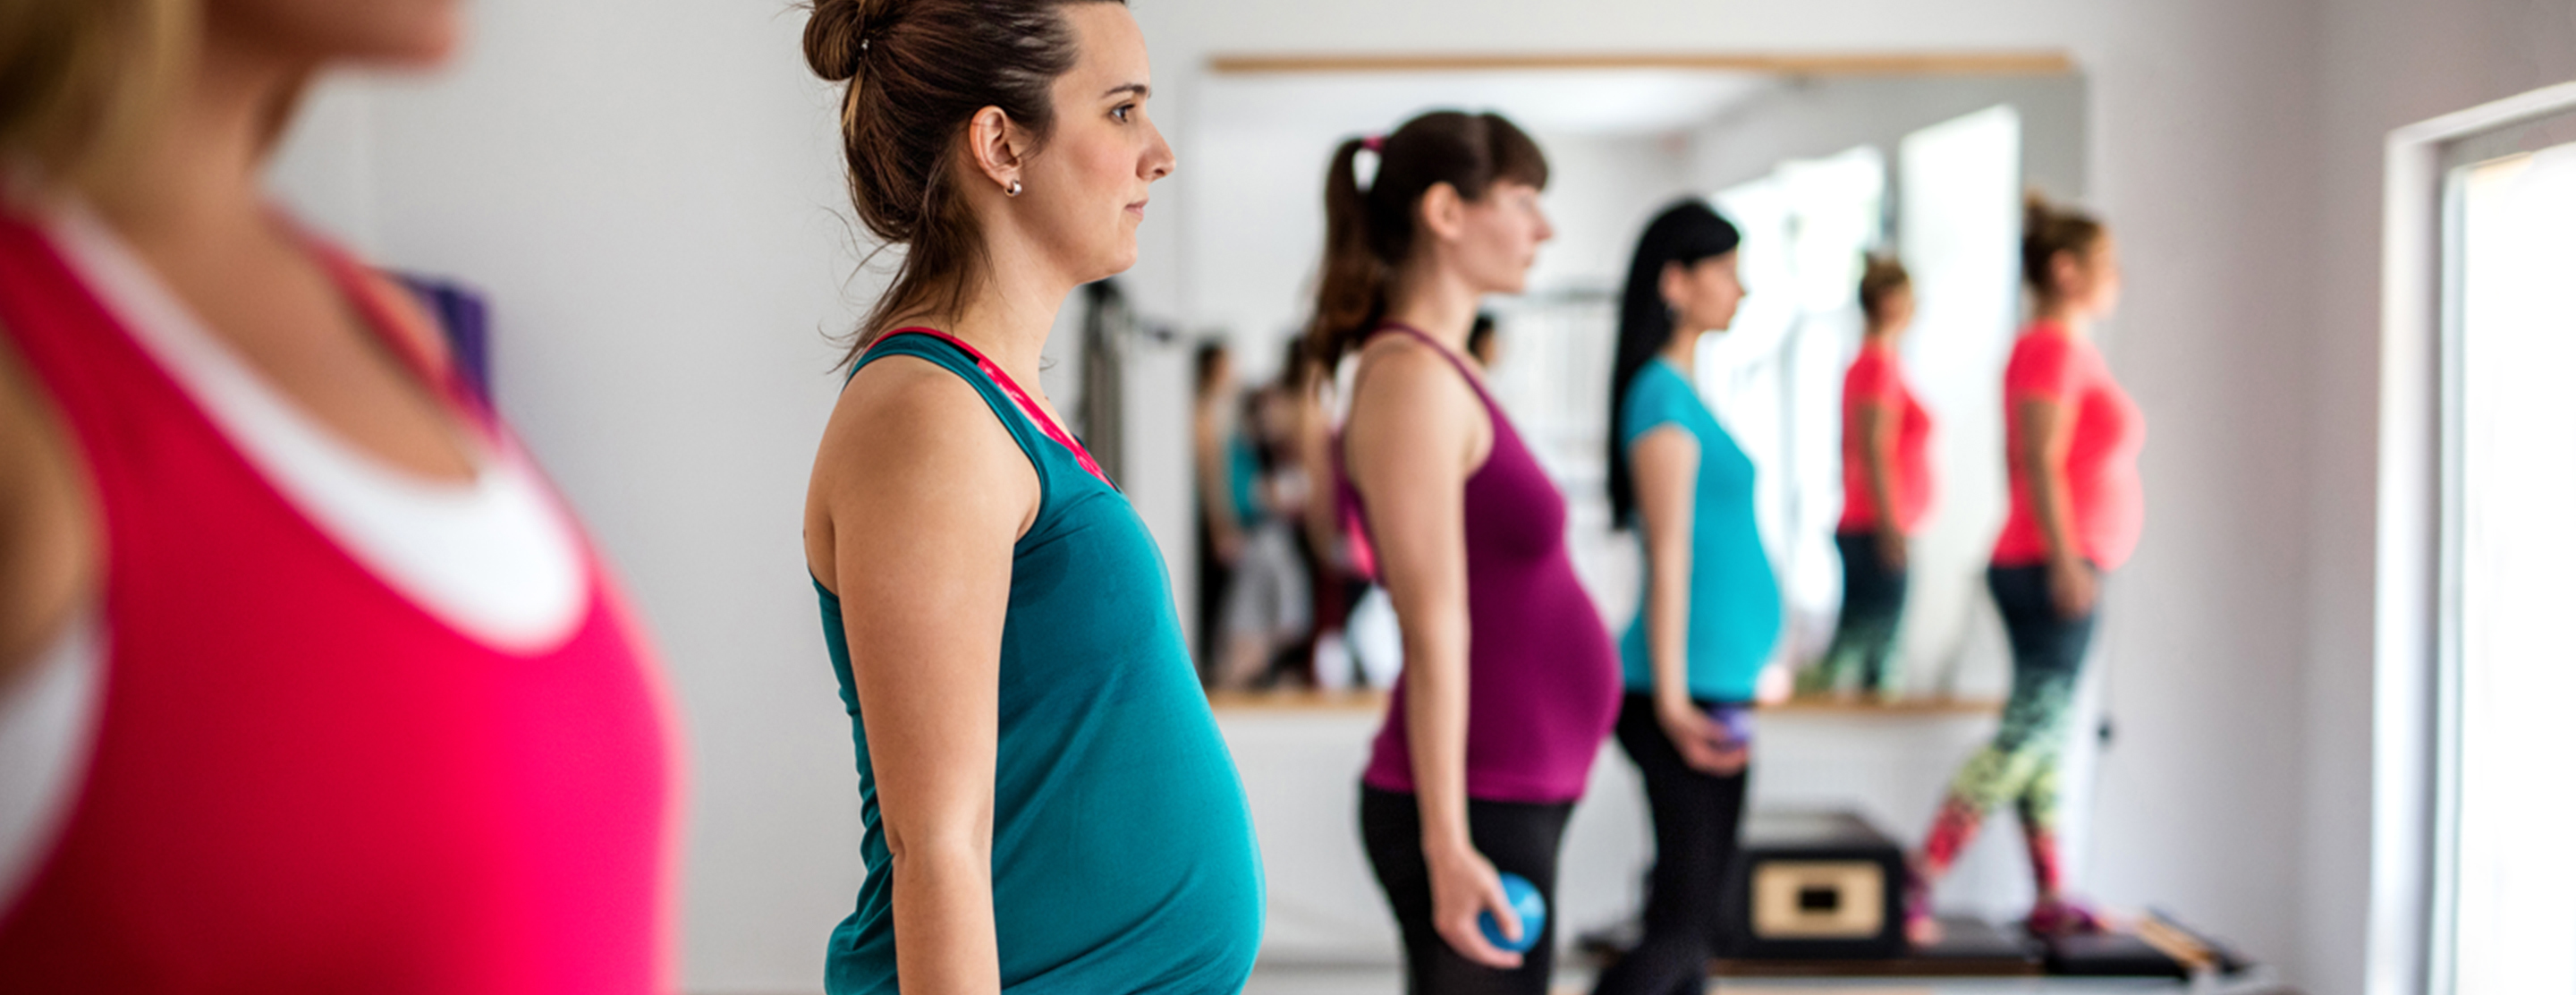 How to Exercise Safely During Pregnancy